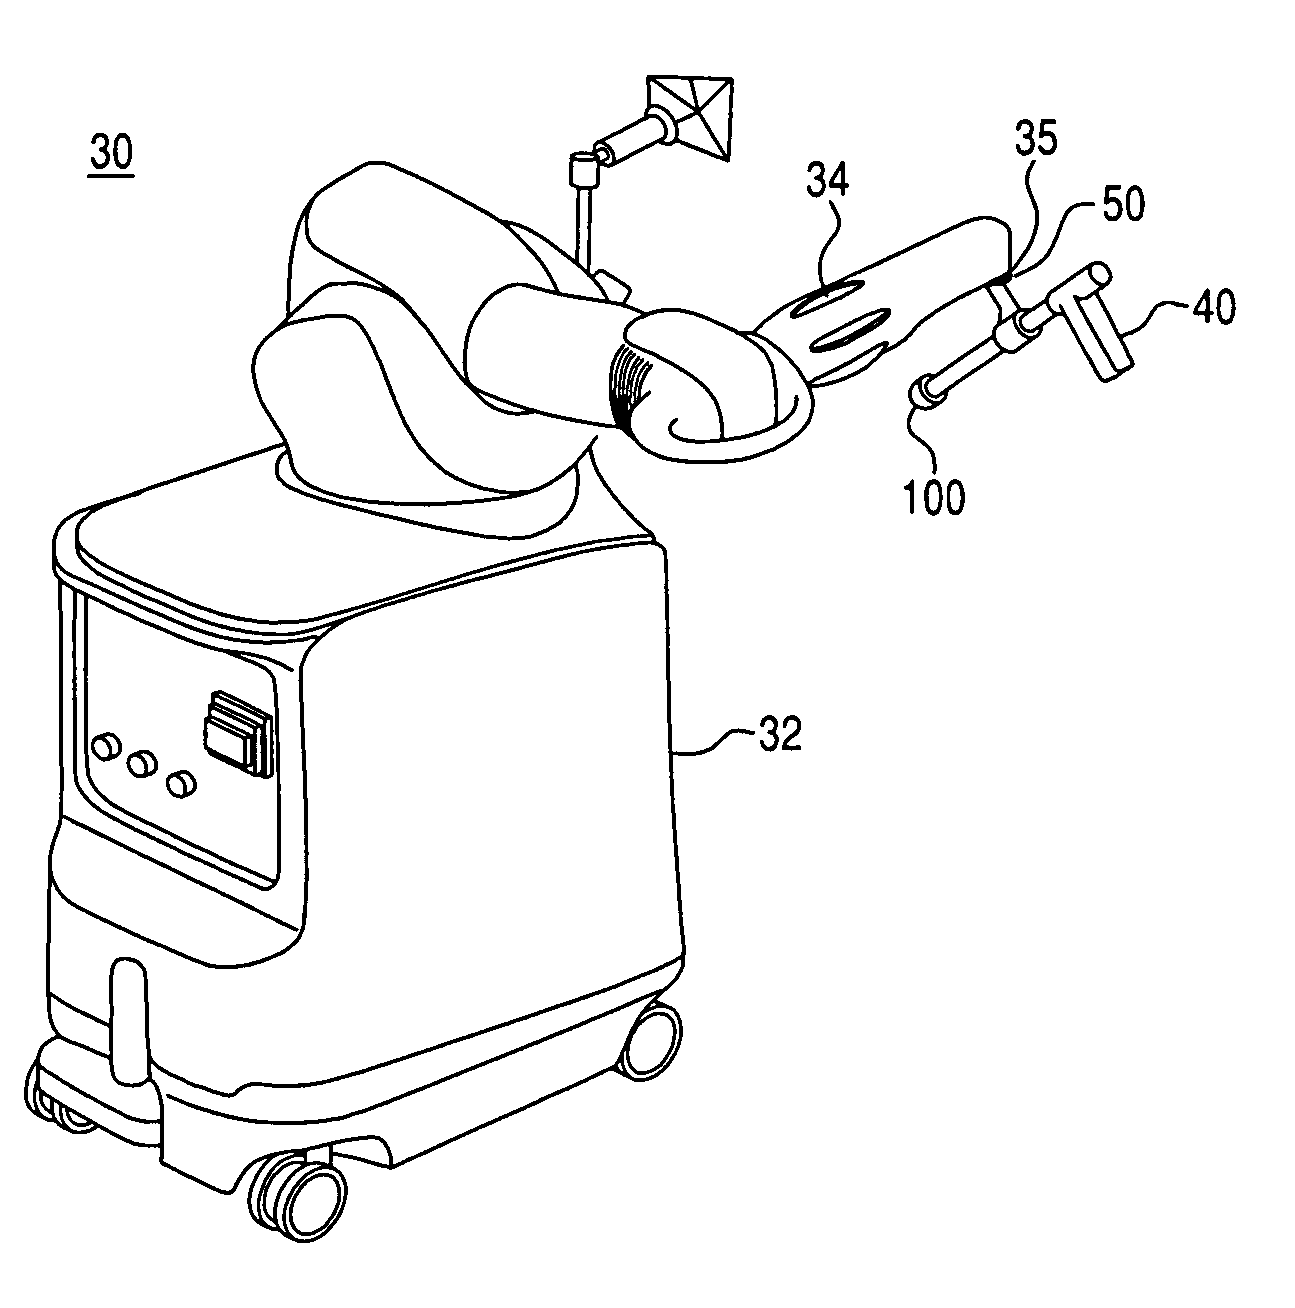 Tool, kit-of-parts for multi-functional tool, and robotic system for same